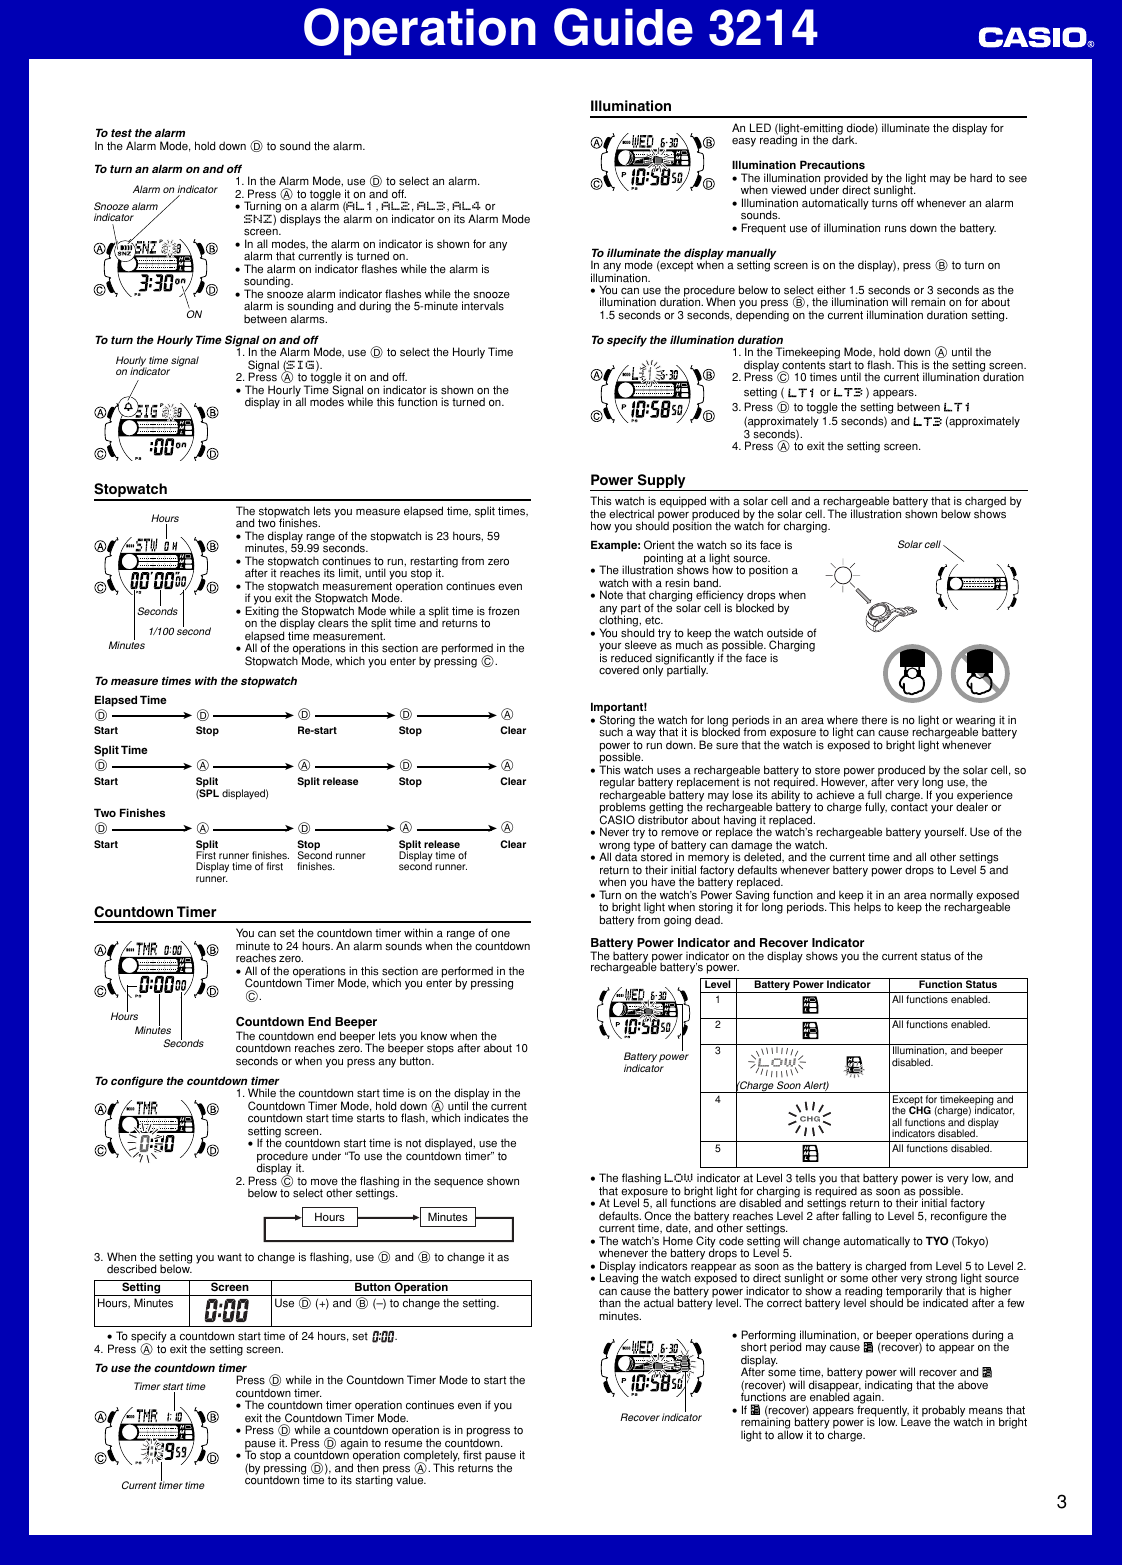 Page 3 of 5 - Casio Casio-Ws210H-1Av-Operation-Manual- QW-3214  Casio-ws210h-1av-operation-manual